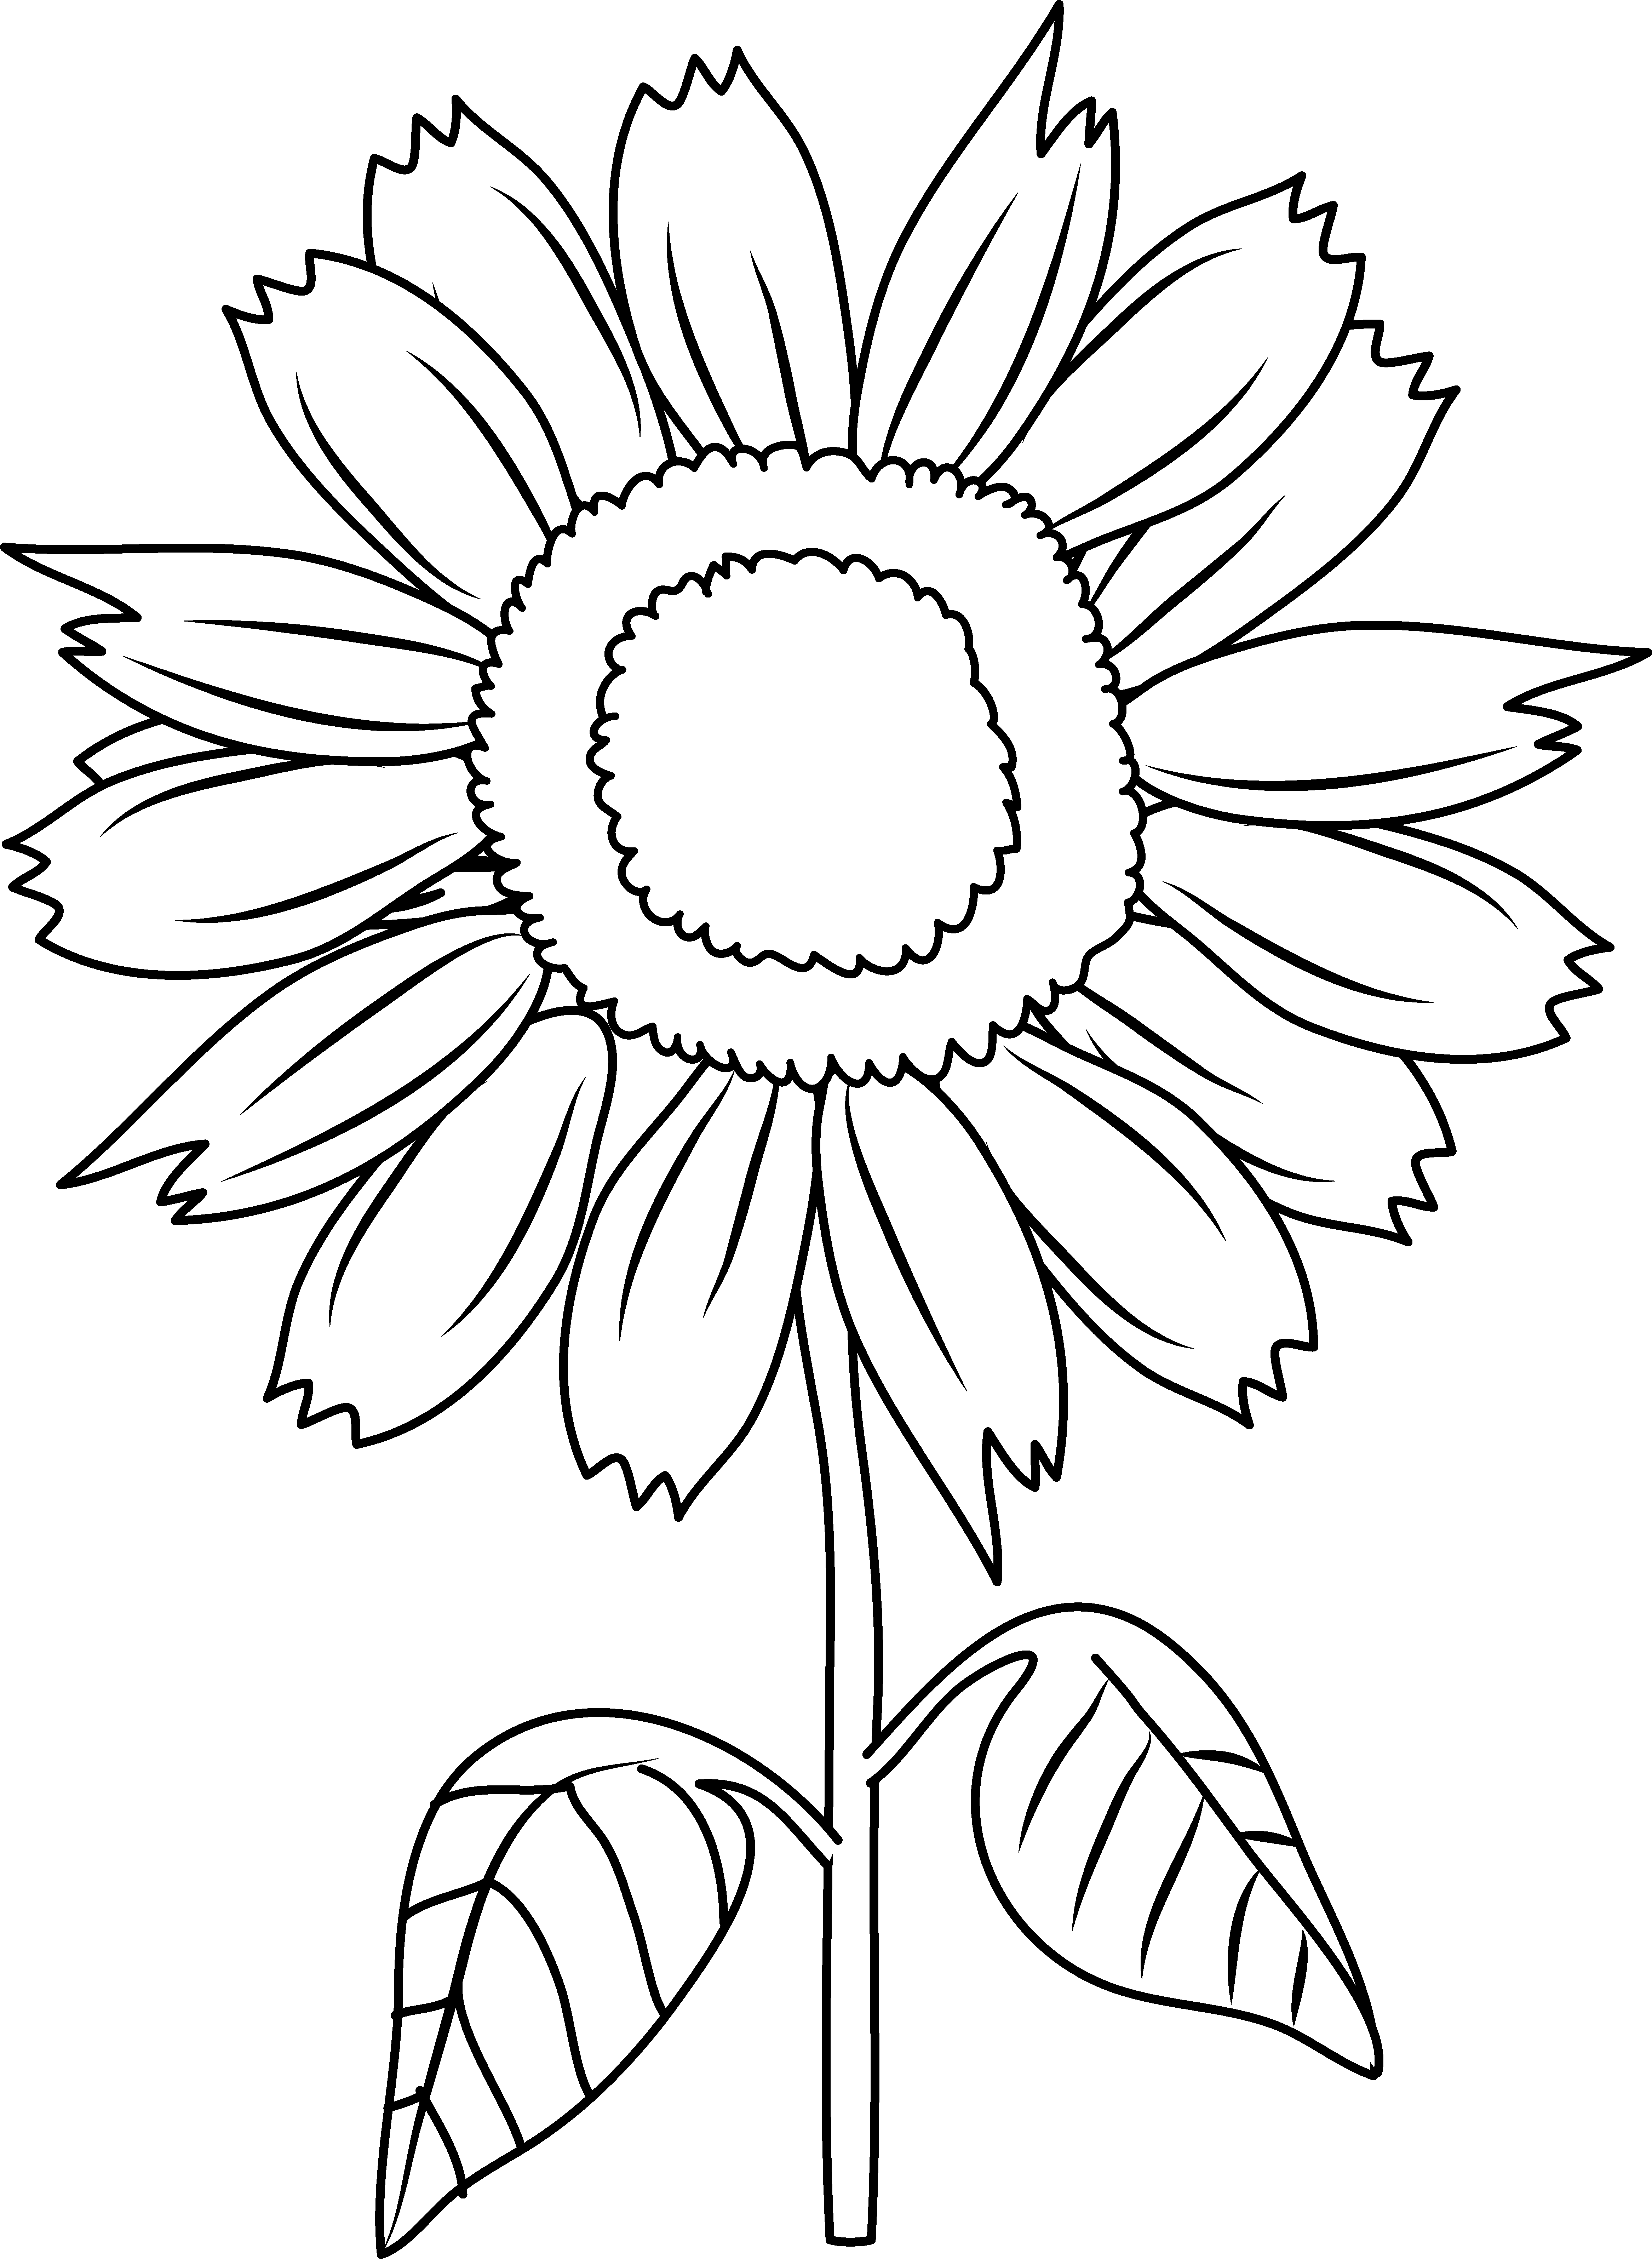 Download and share clipart about Pretty Sunflower Coloring Page - Sun Flowe...